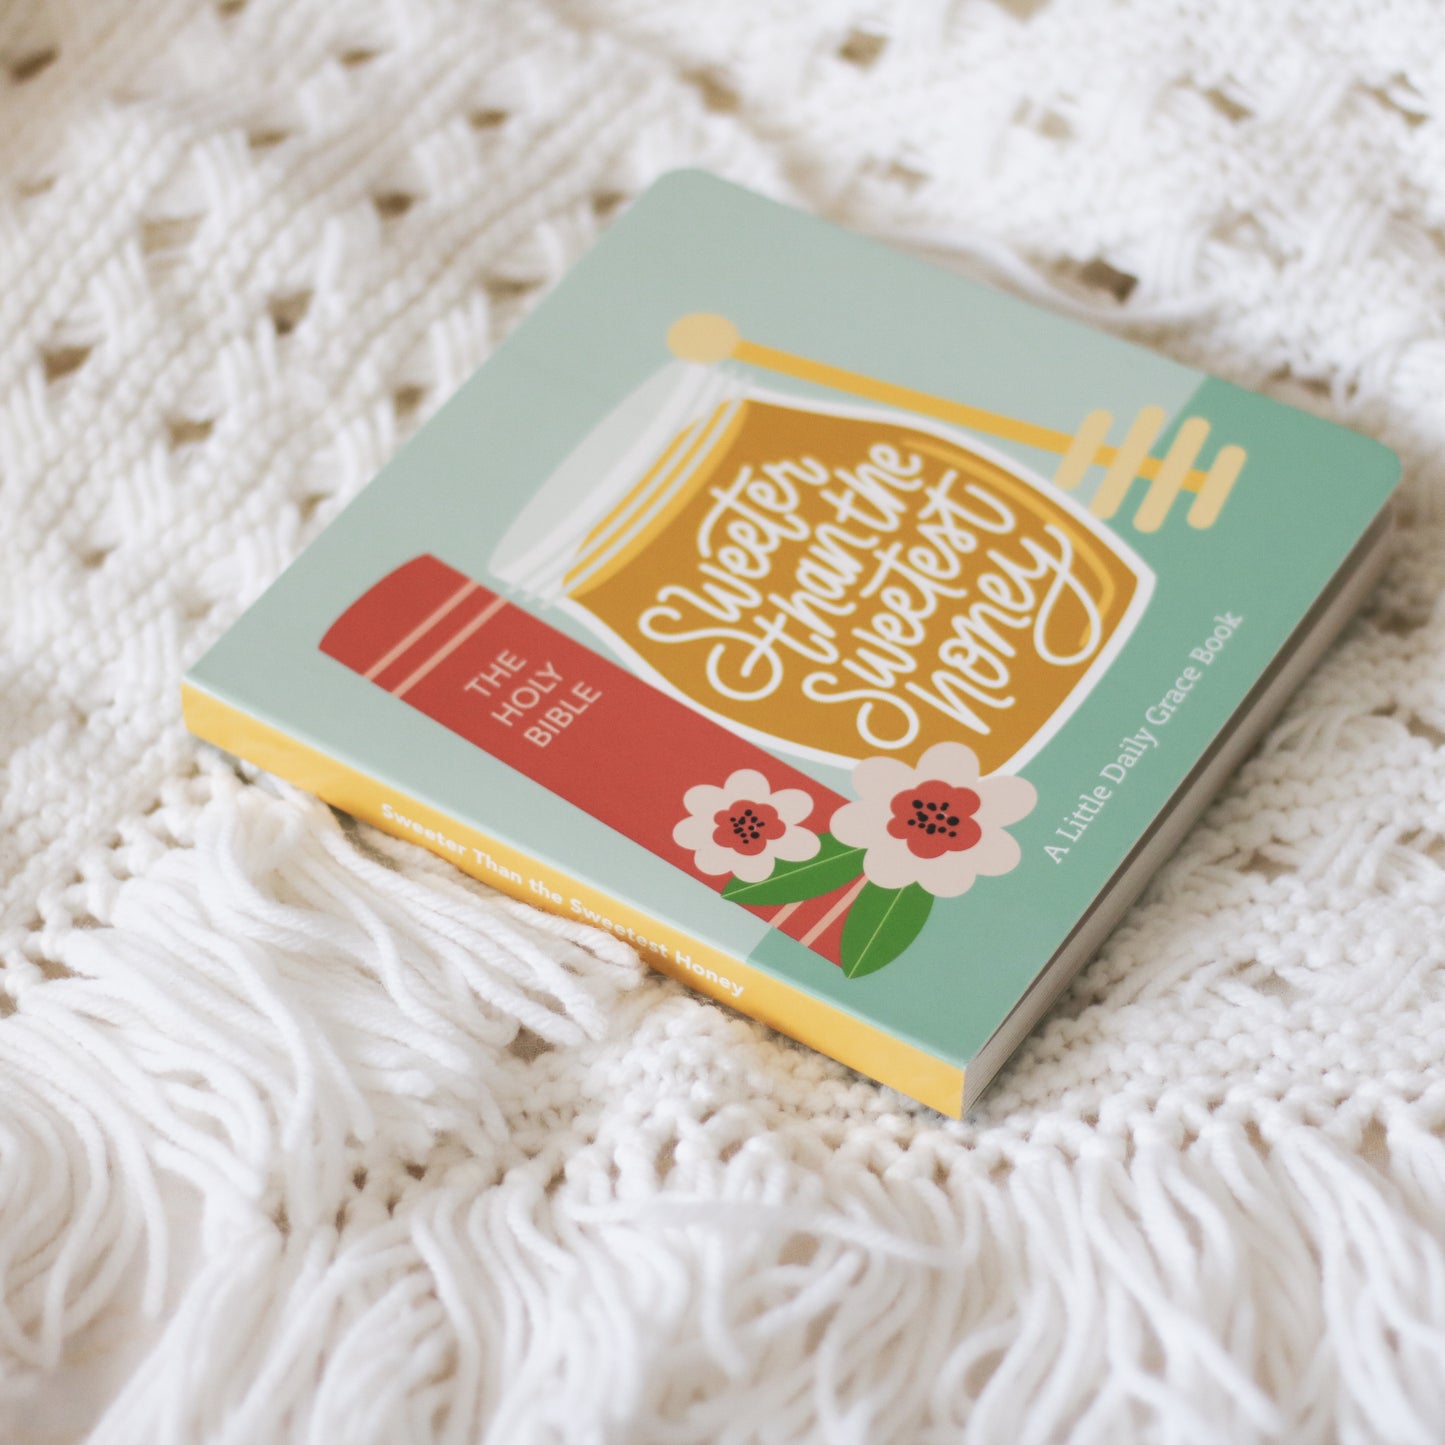 Sweeter Than The Sweetest Honey Board Book